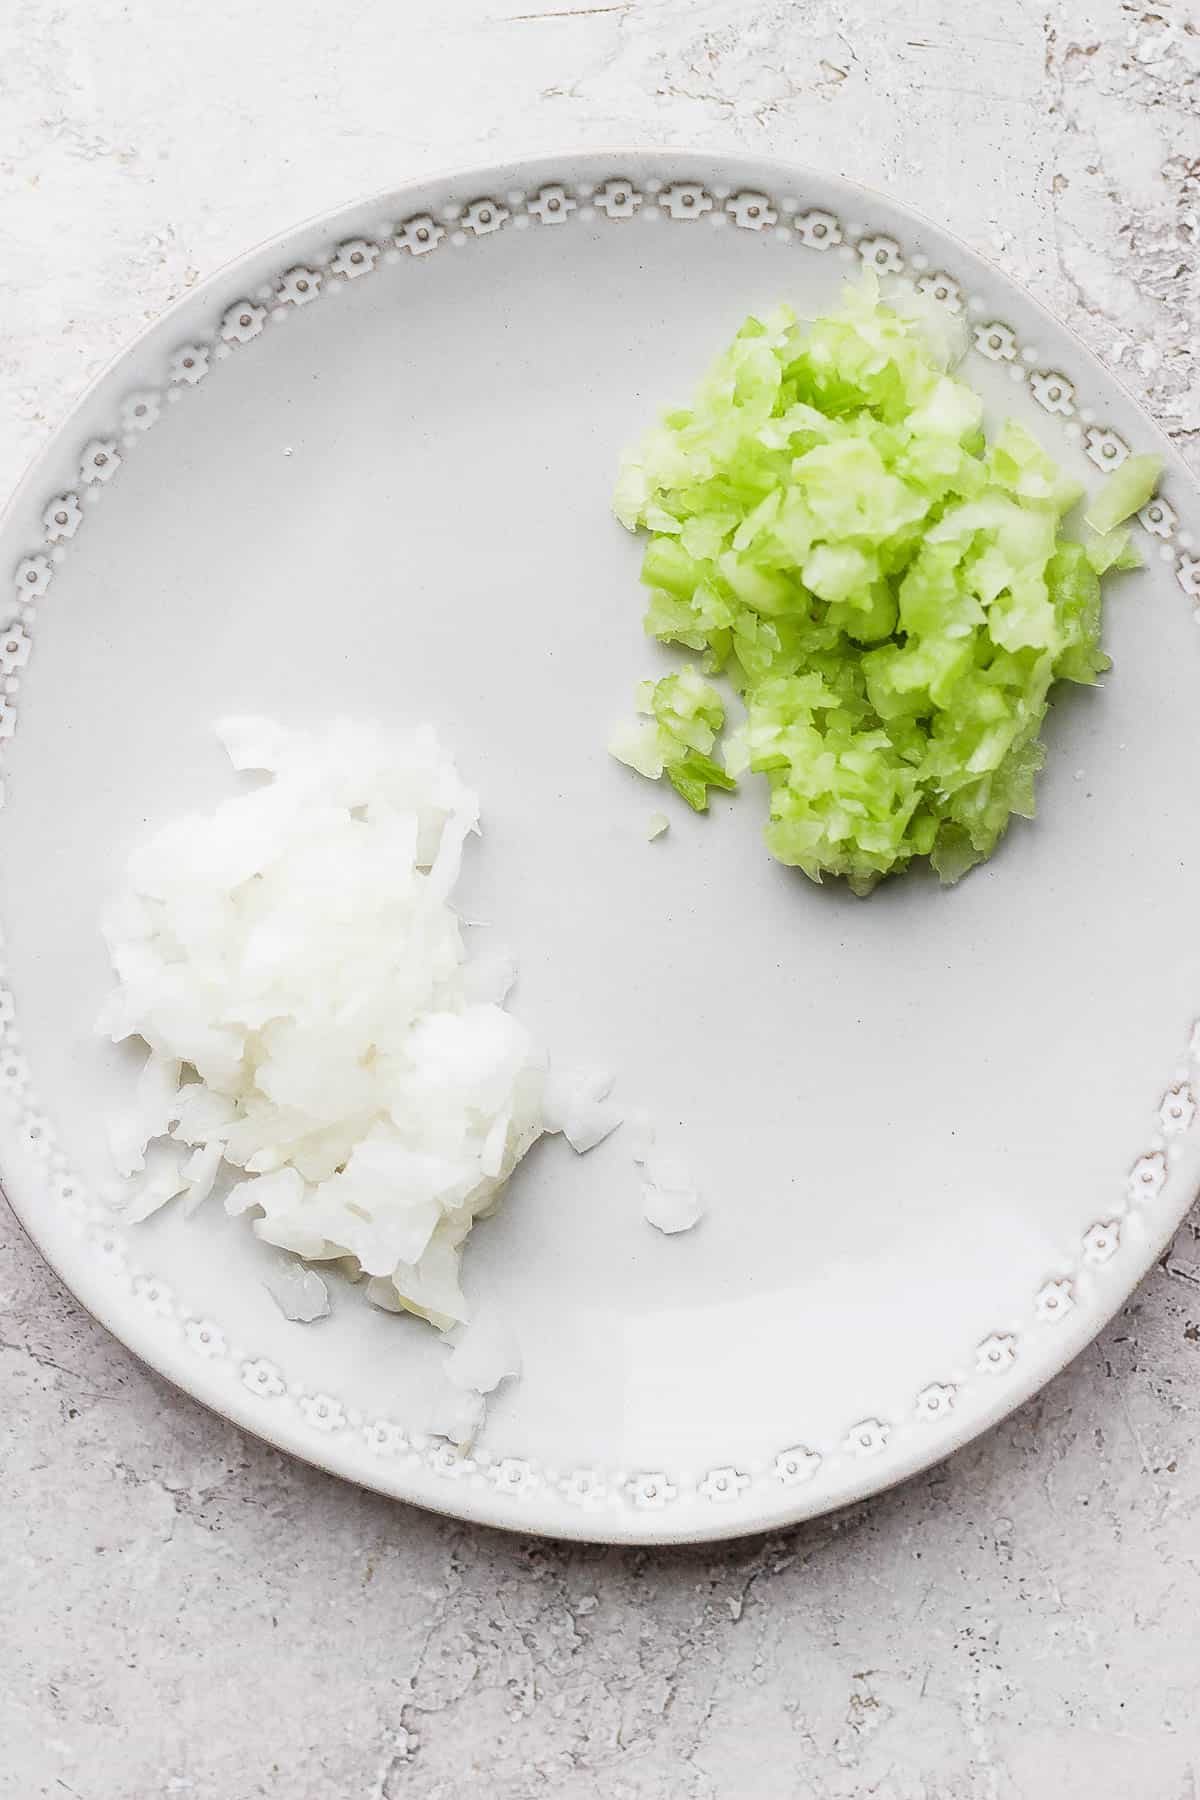 Minced celery and onion on a plate.